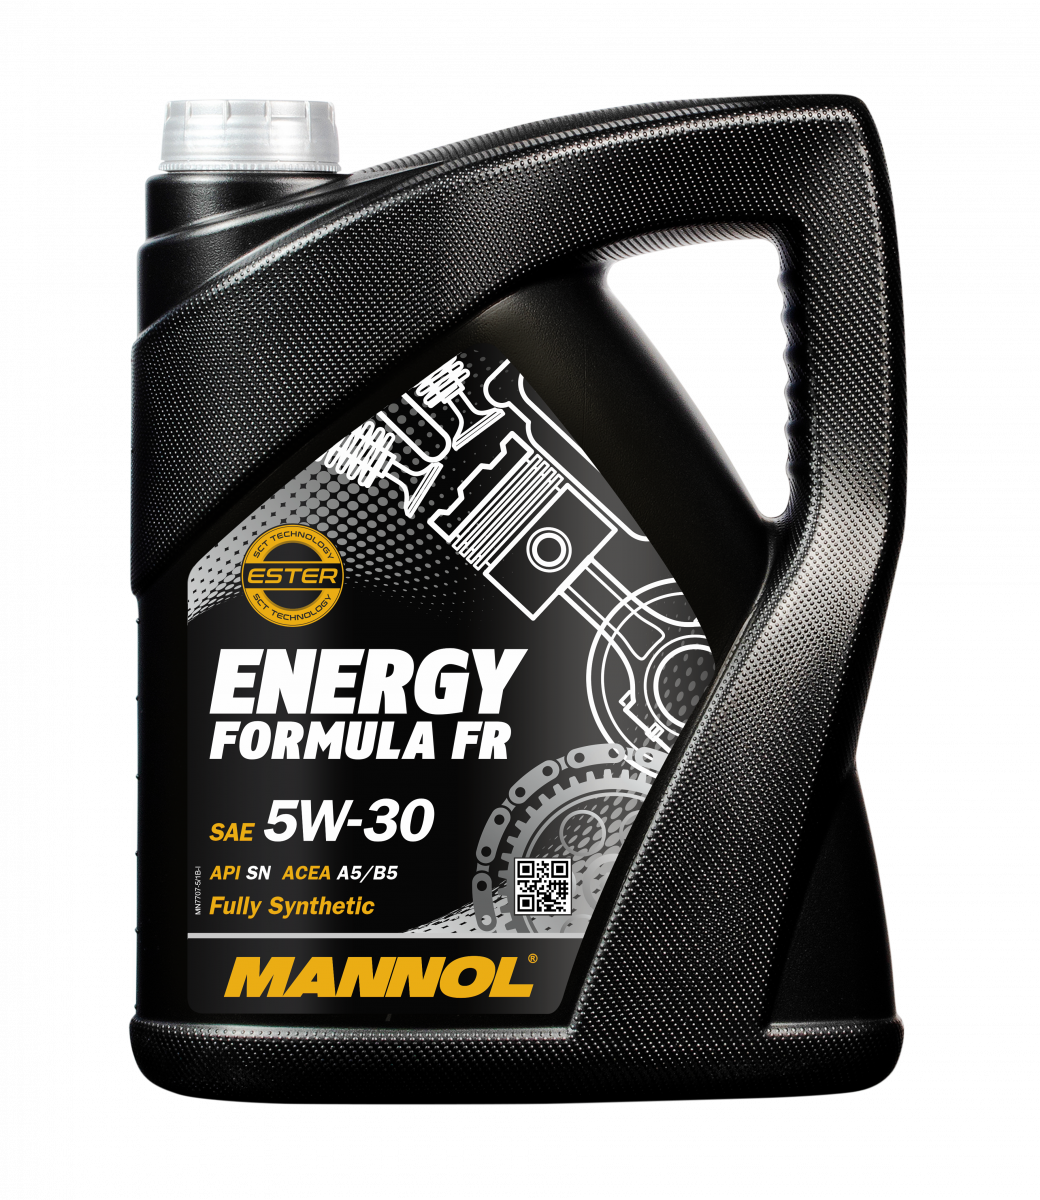 MANNOL O.E.M for Ford Volvo SAE 5W-30 5W30 Engine Oil 7707 Enjin Oil Minyak  Ford Ranger Engine Oil Made In Germany